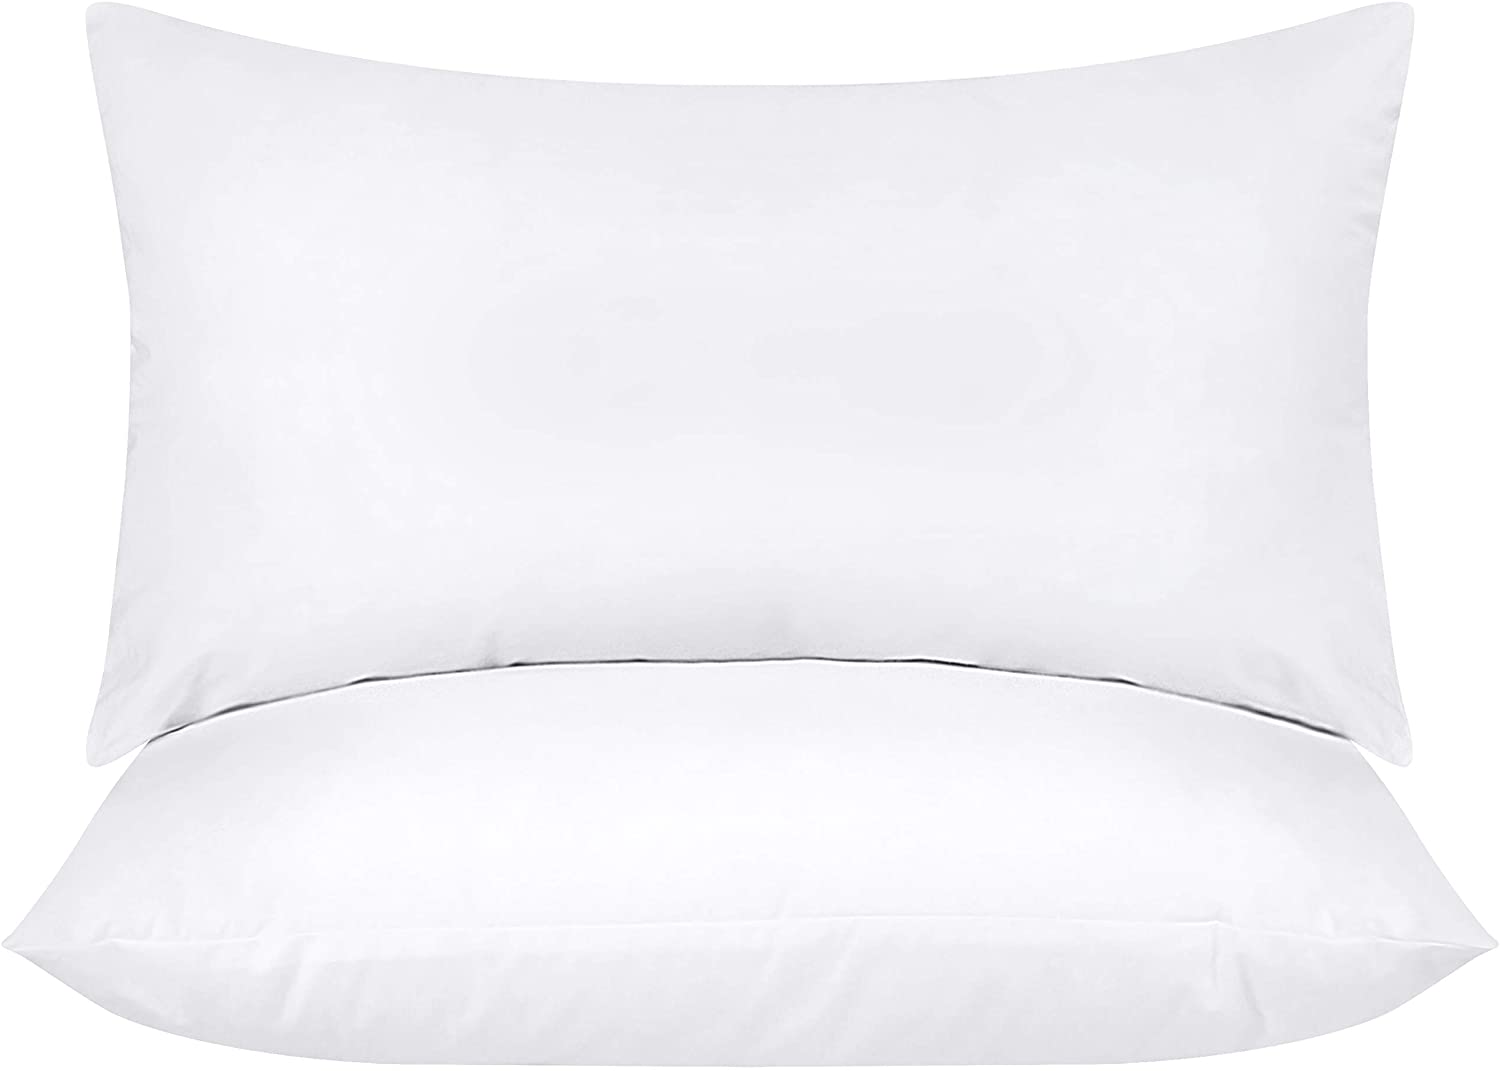 Utopia Bedding Throw Pillows Insert (Pack of 2, White) - 14 x 14 Inches Bed  and Couch Pillows - Indoor Decorative Pillows 